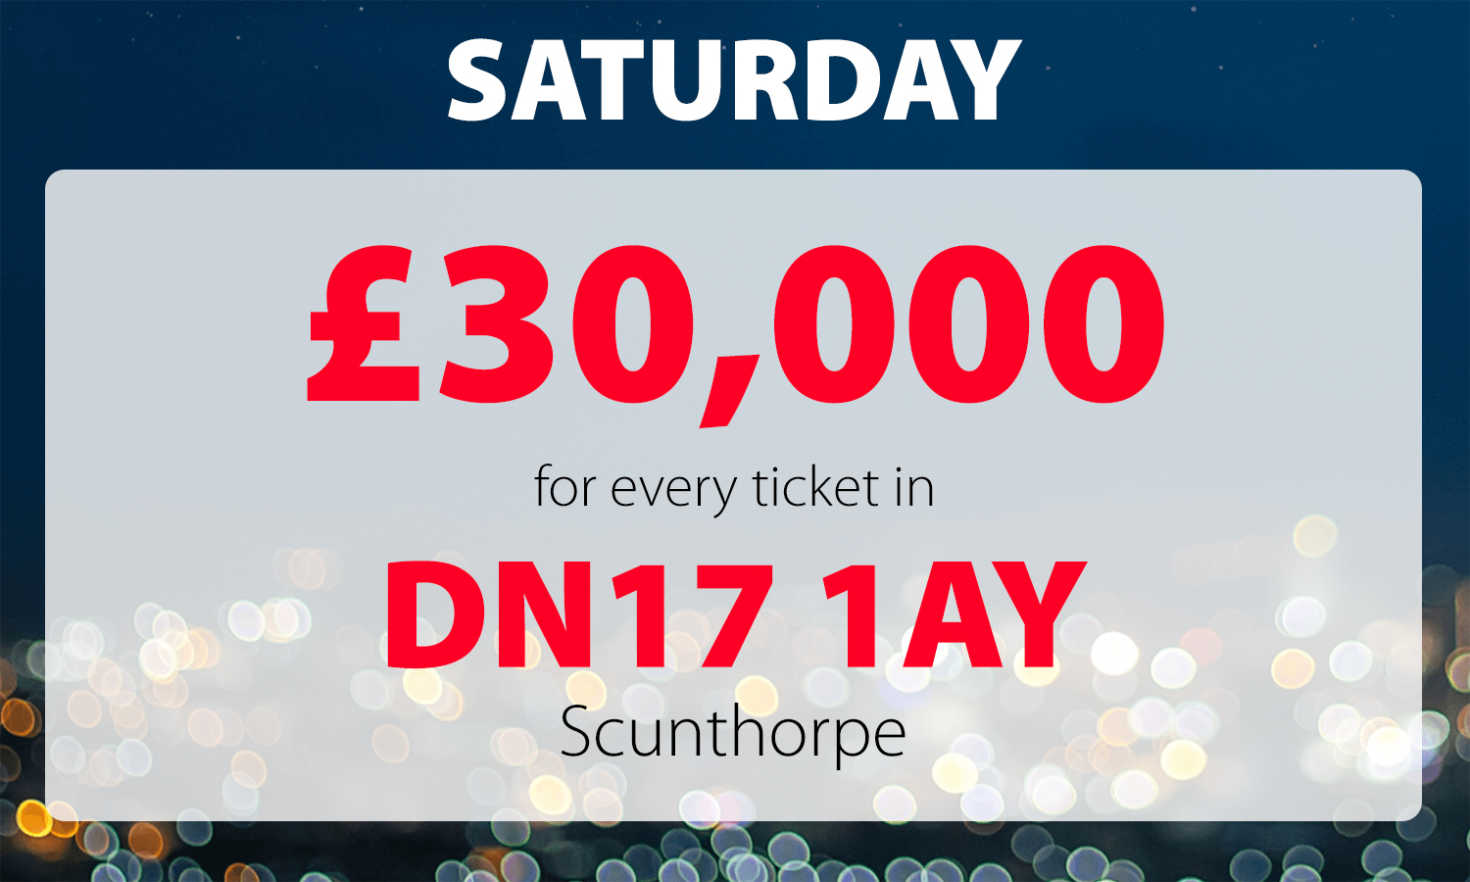 One player in postcode DN17 1AY has won £60,000 today